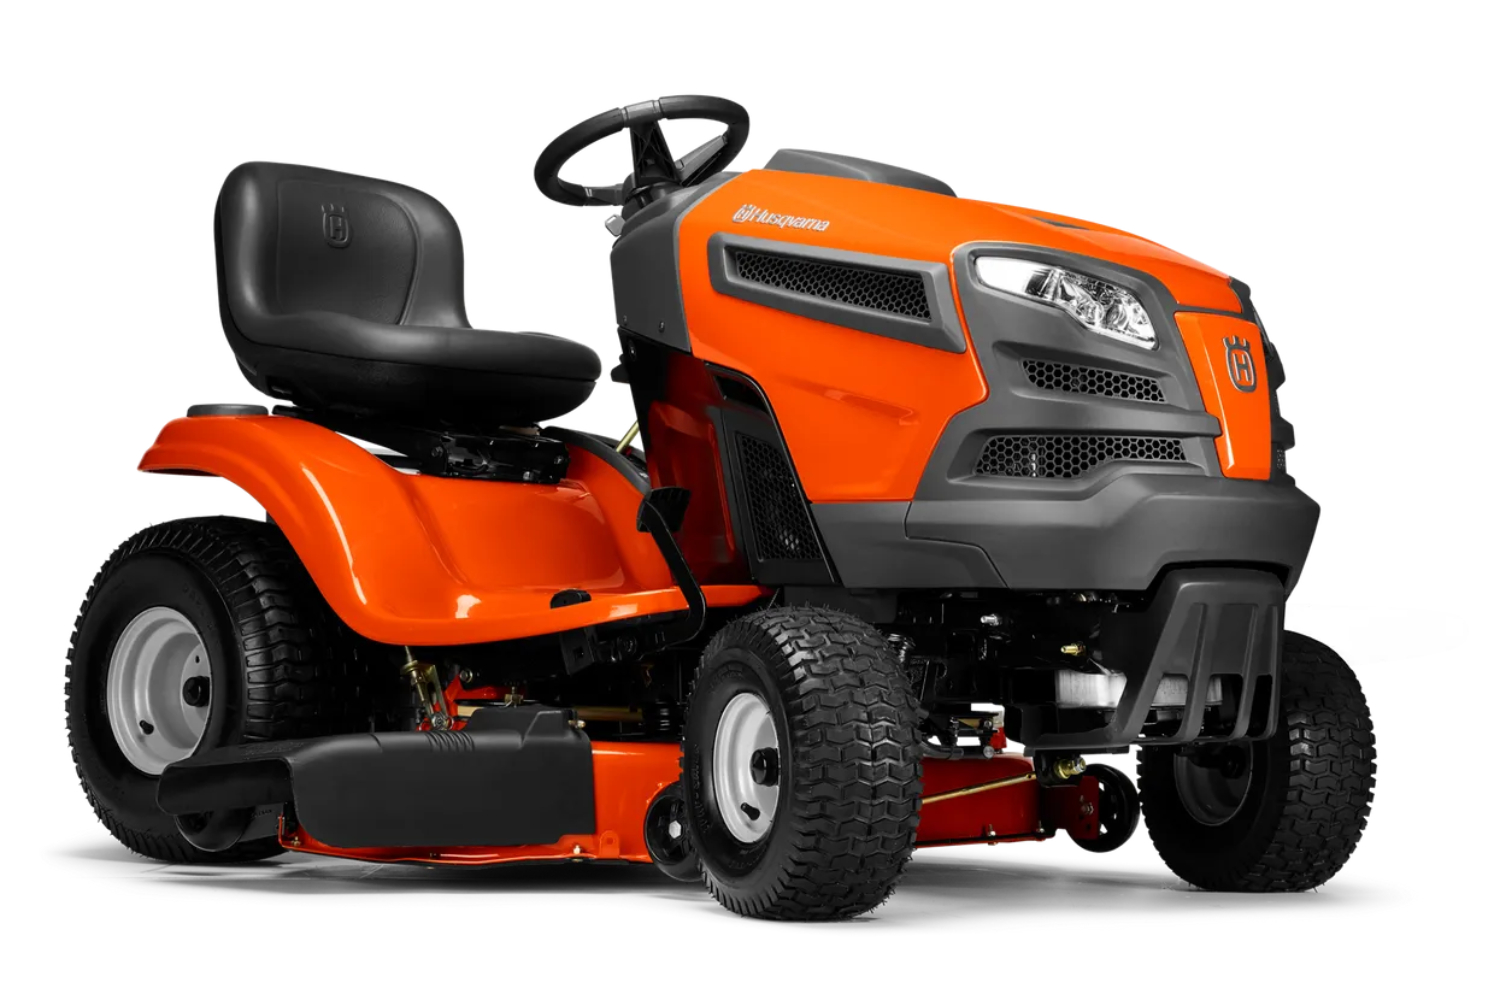 The best riding lawn mowers